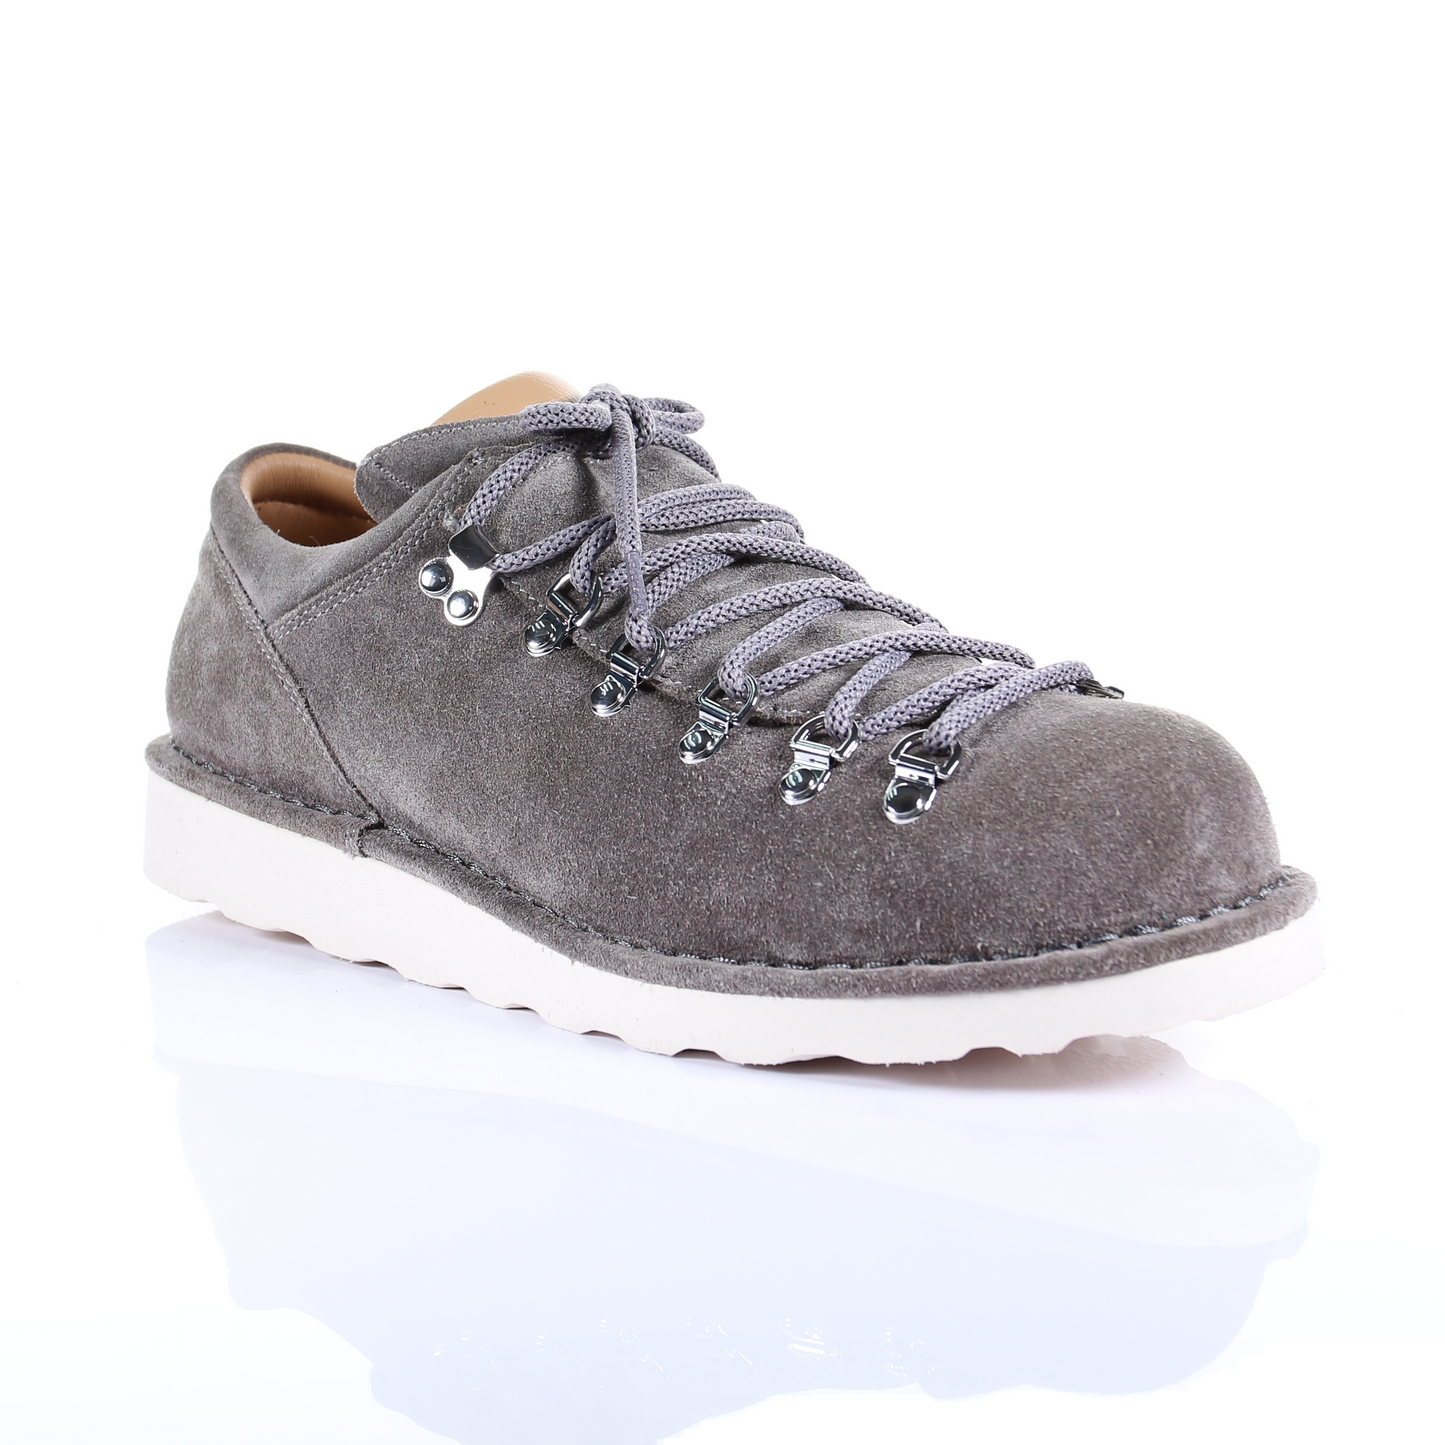 Men's Style Suede Mountain Shoes (Grey)